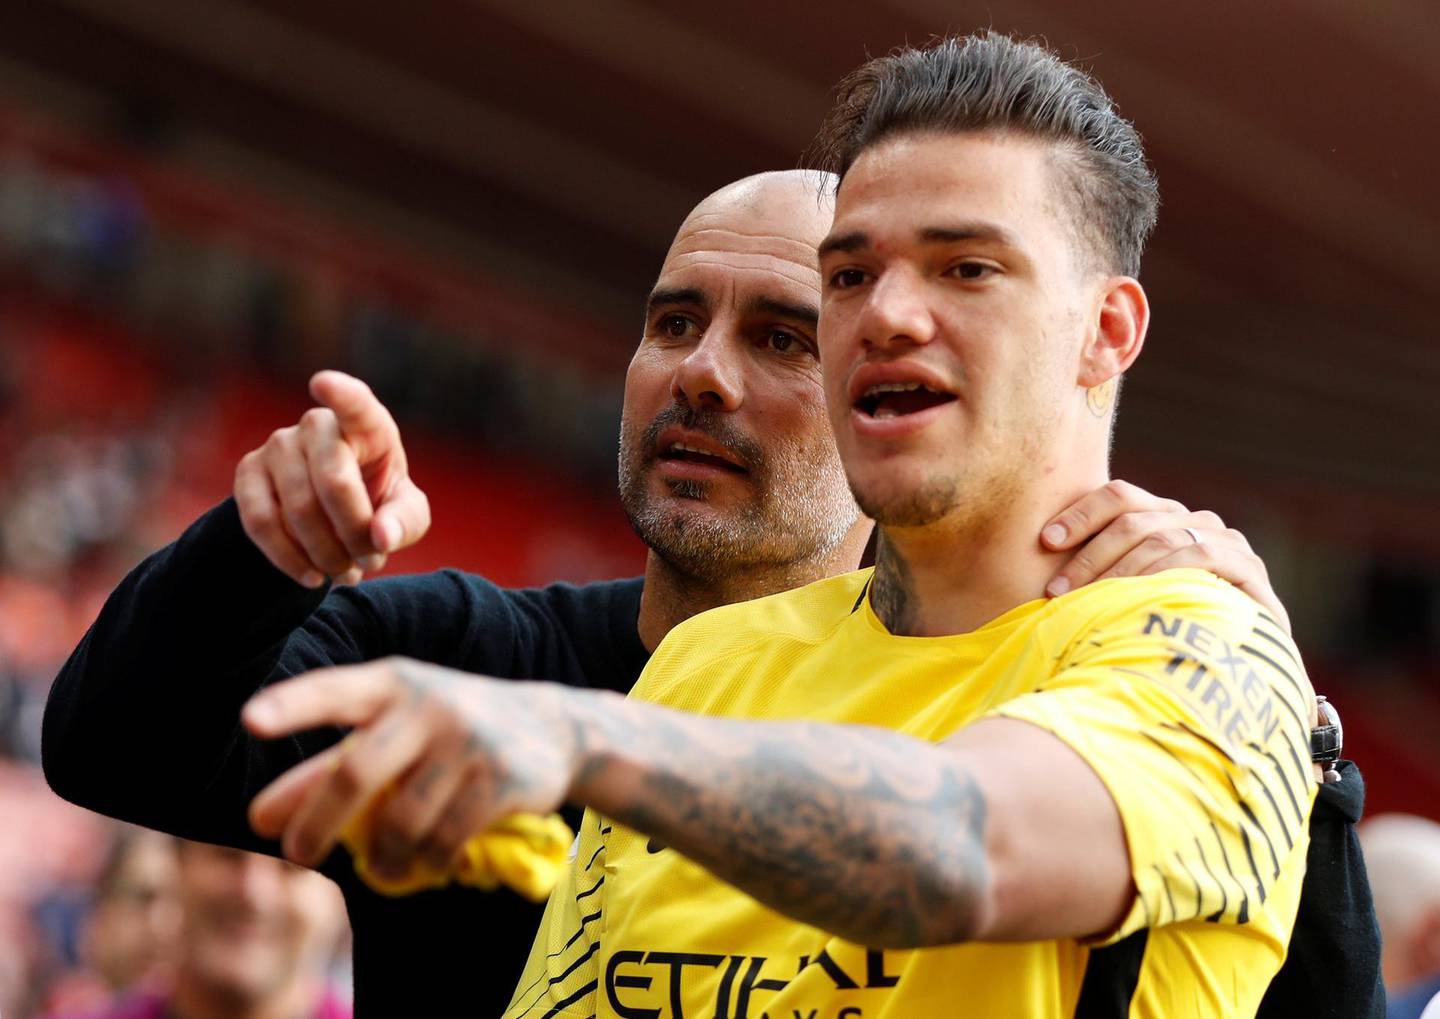 Soccer Football - Premier League - Southampton vs Manchester City - St Mary's Stadium, Southampton, Britain - May 13, 2018   Manchester City manager Pep Guardiola celebrates with Ederson after the match   Action Images via Reuters/John Sibley    EDITORIAL USE ONLY. No use with unauthorized audio, video, data, fixture lists, club/league logos or "live" services. Online in-match use limited to 75 images, no video emulation. No use in betting, games or single club/league/player publications.  Please contact your account representative for further details.